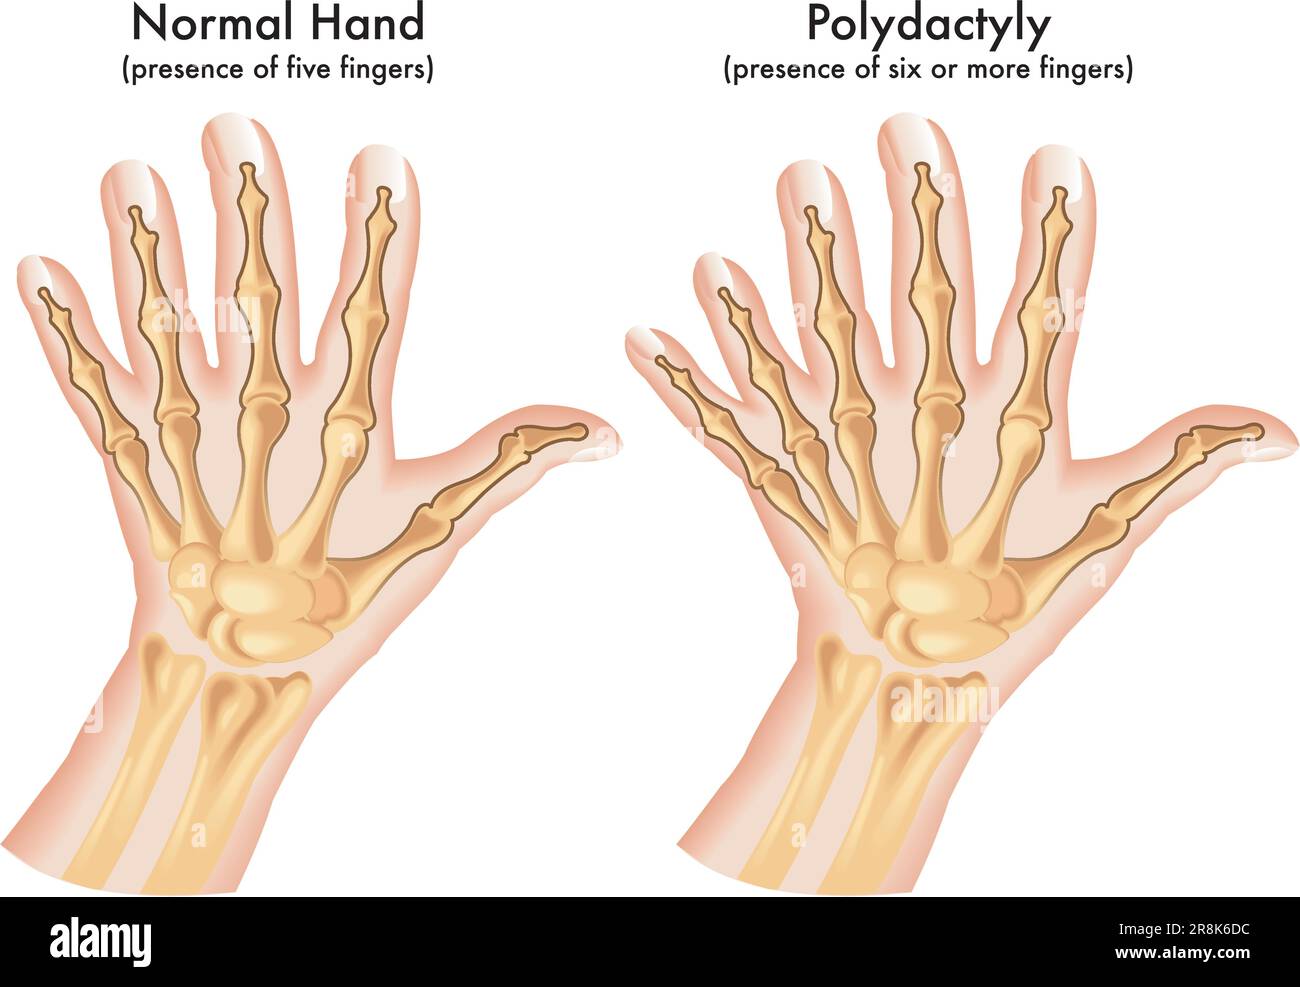 Medical illustration of a hand afflicted with Polydactyly, a congenital abnormality characterized by the presence of six or more fingers. Stock Vector